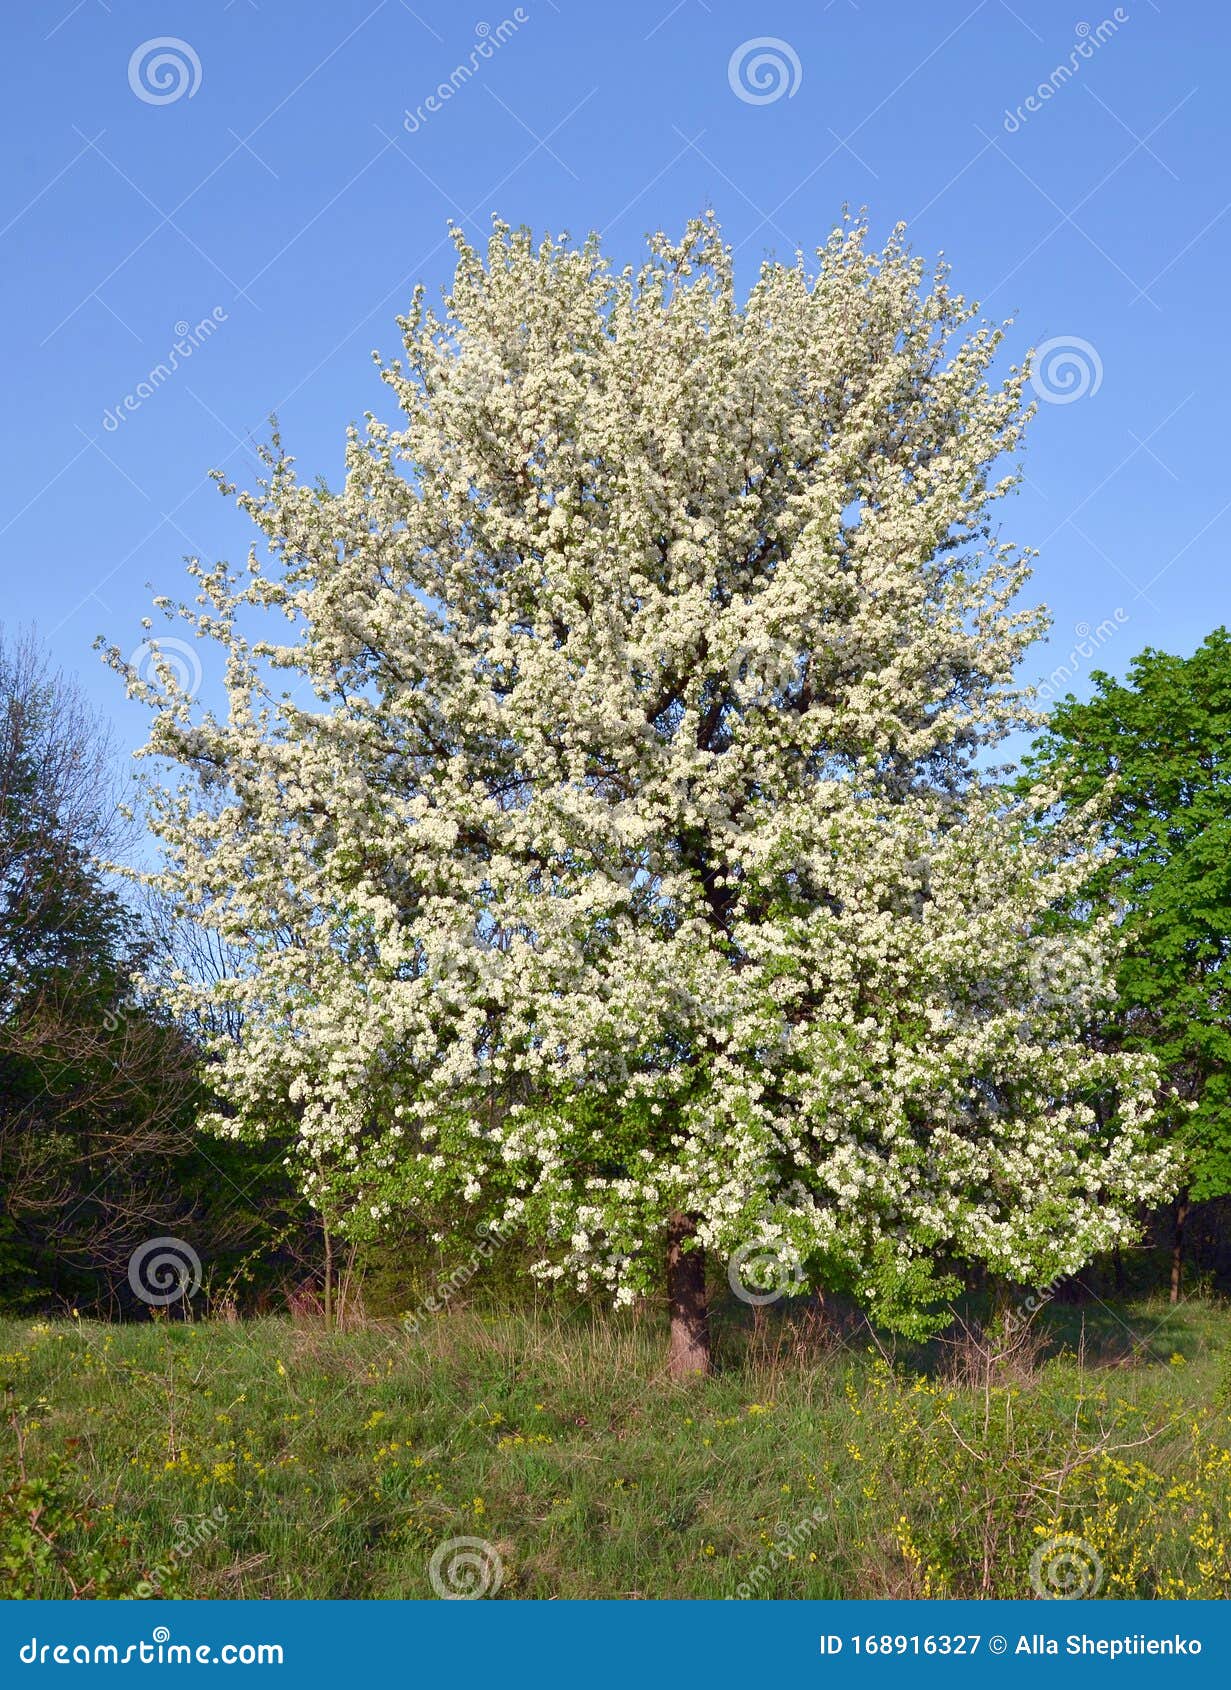 Fruit Tree With White Flowers Sunny Afternoon In The Park Stock Image